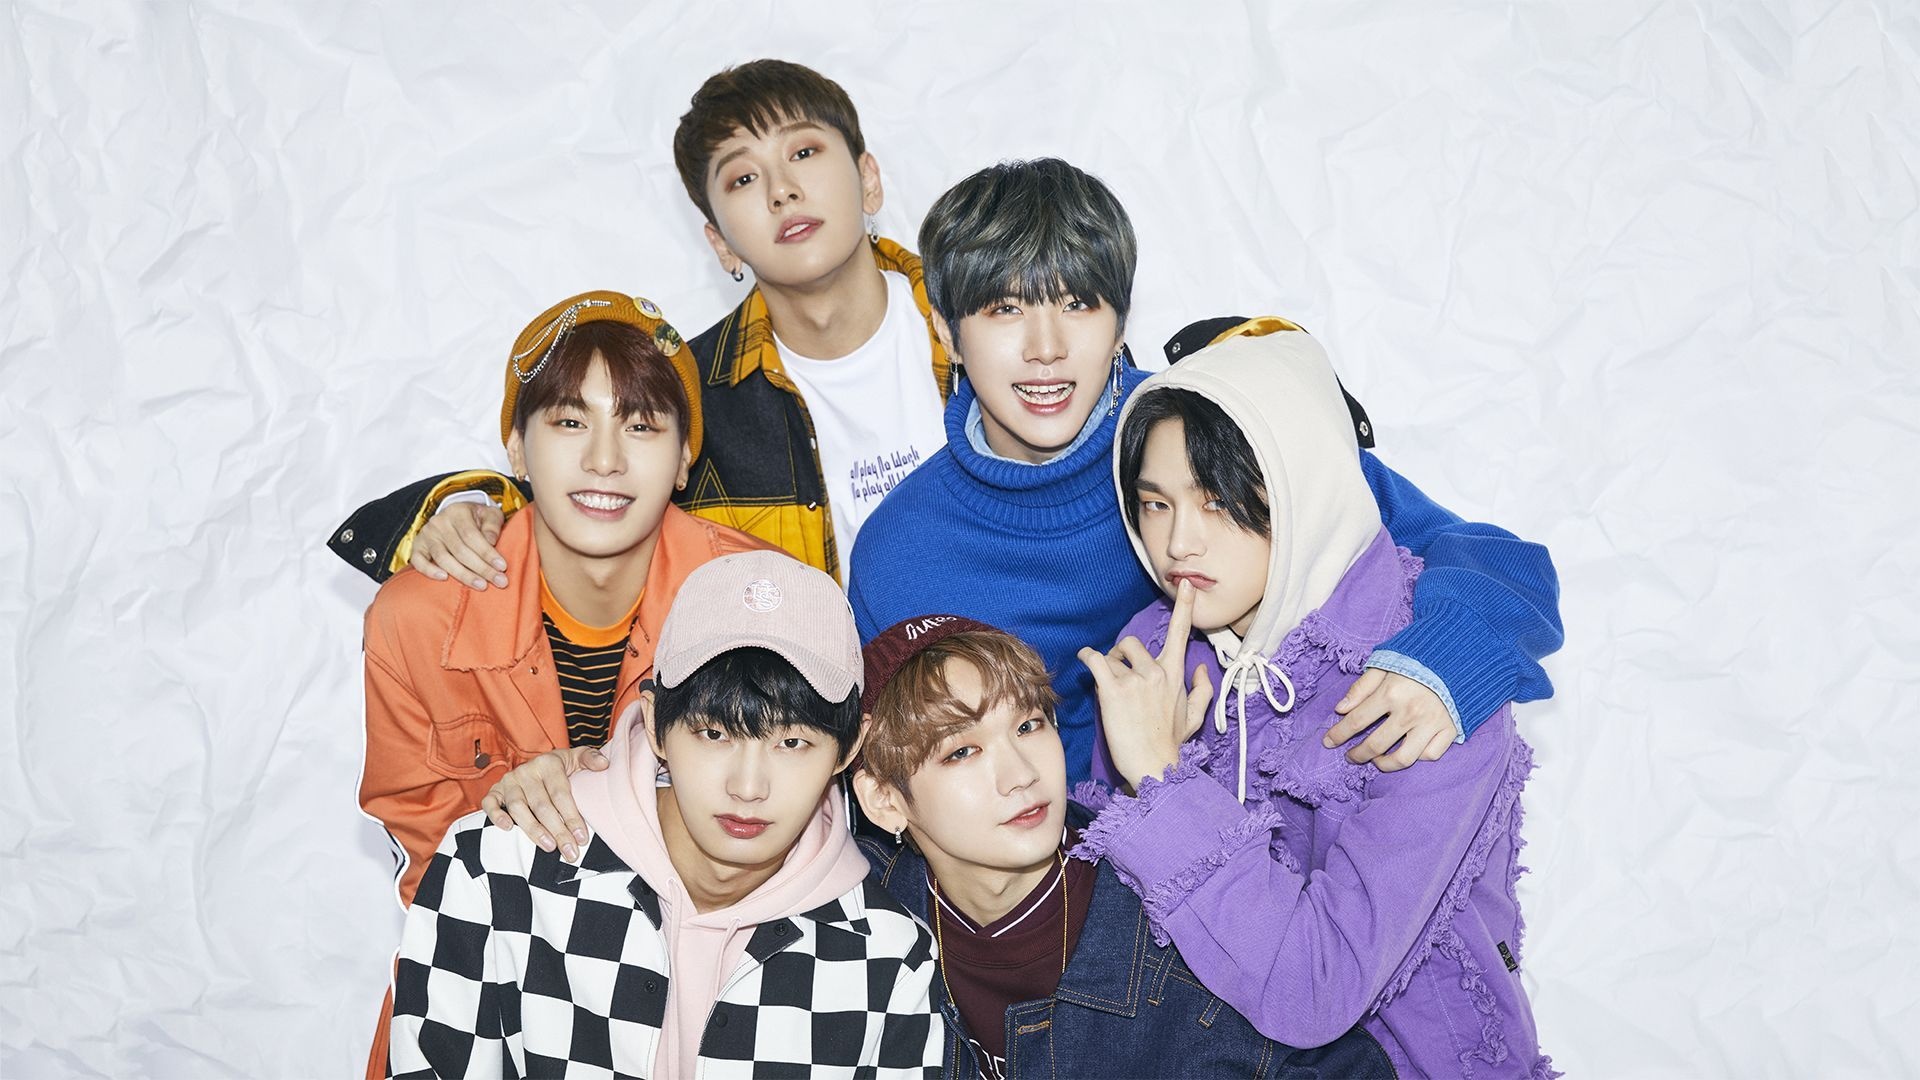 Astro band, Kpop computer wallpapers, High-quality backgrounds, 1920x1080 Full HD Desktop